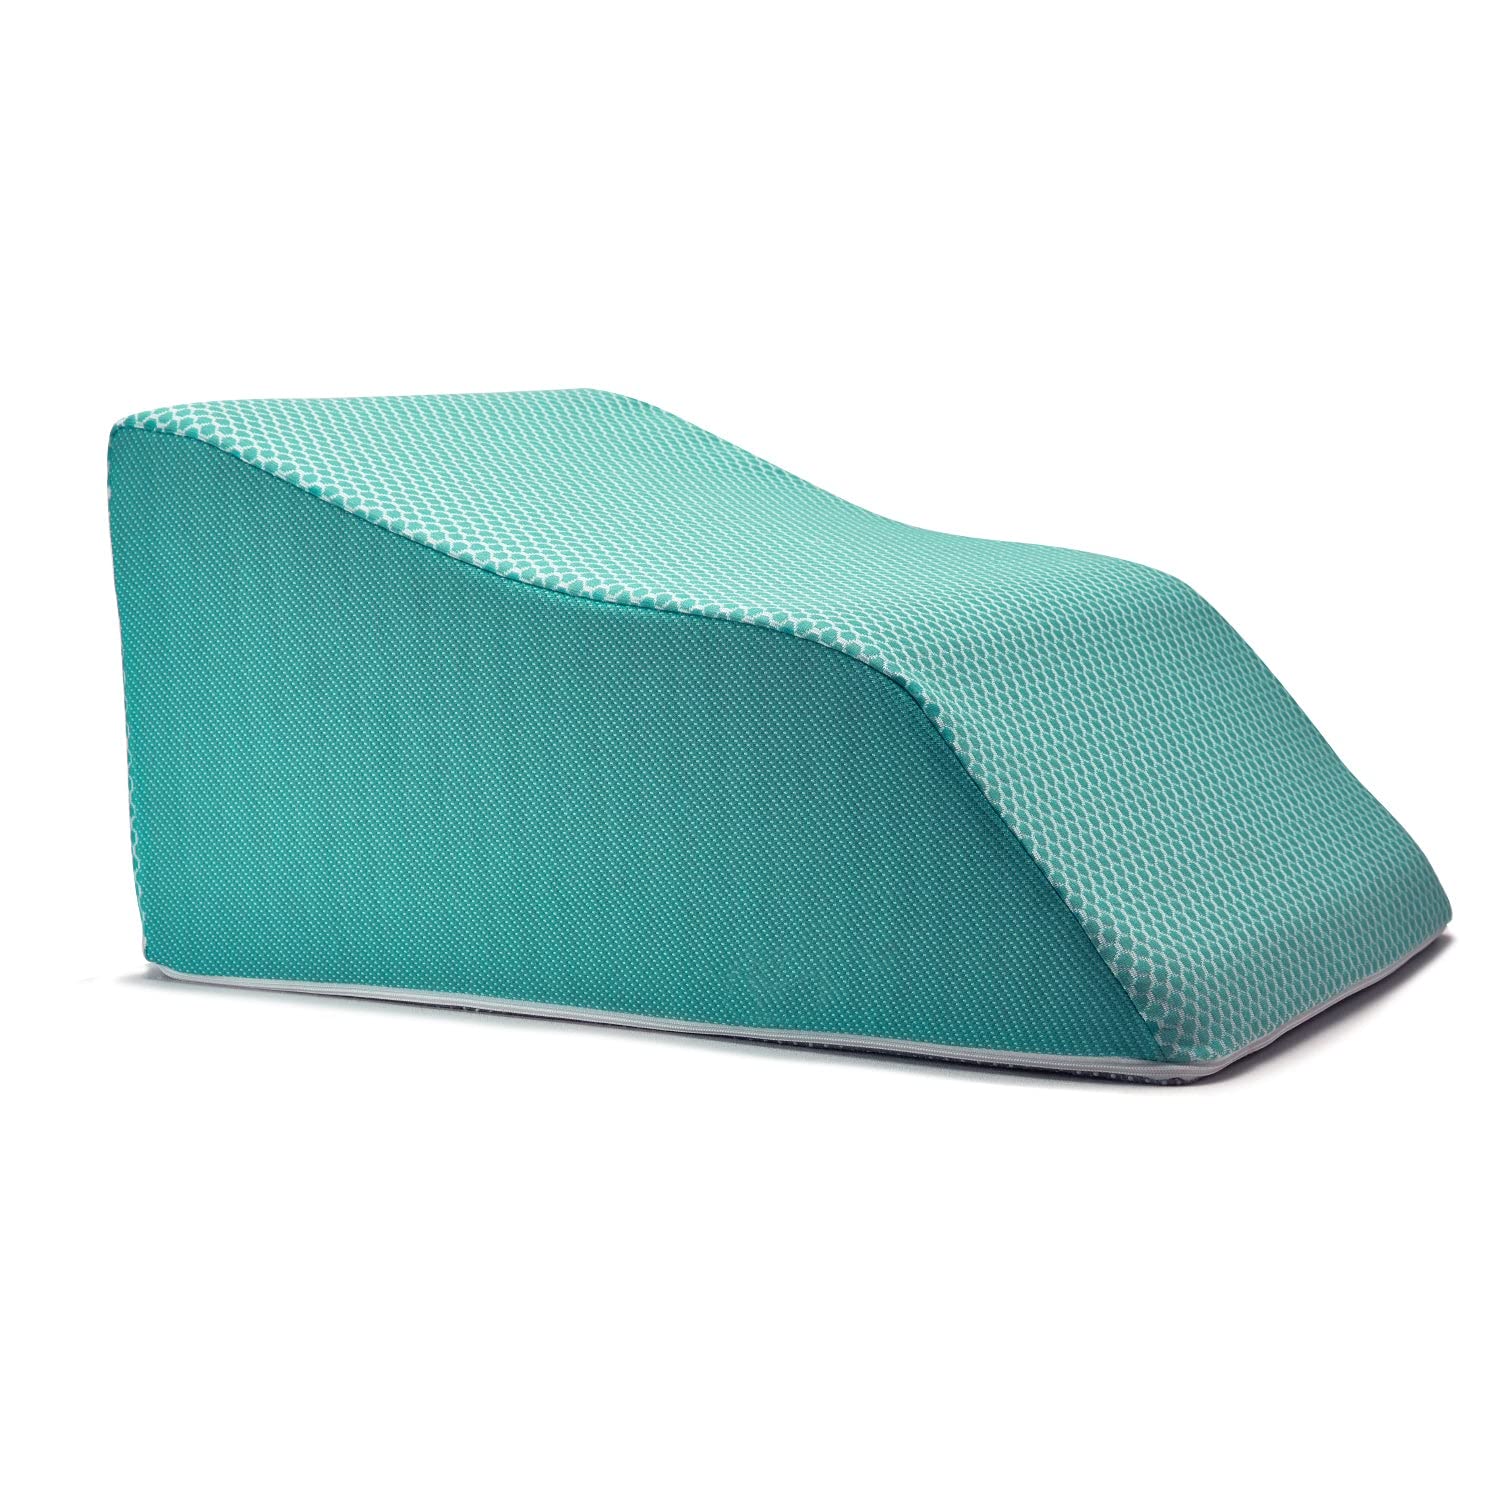 Lounge Doctor Elevating Leg Rest Pillow with Memory Foam, Uniquely Designed Incline Wedge for Vein Circulation, Leg Swelling, Lymphedema,Leg and Back Pain, Relaxation, Light Blue, 24